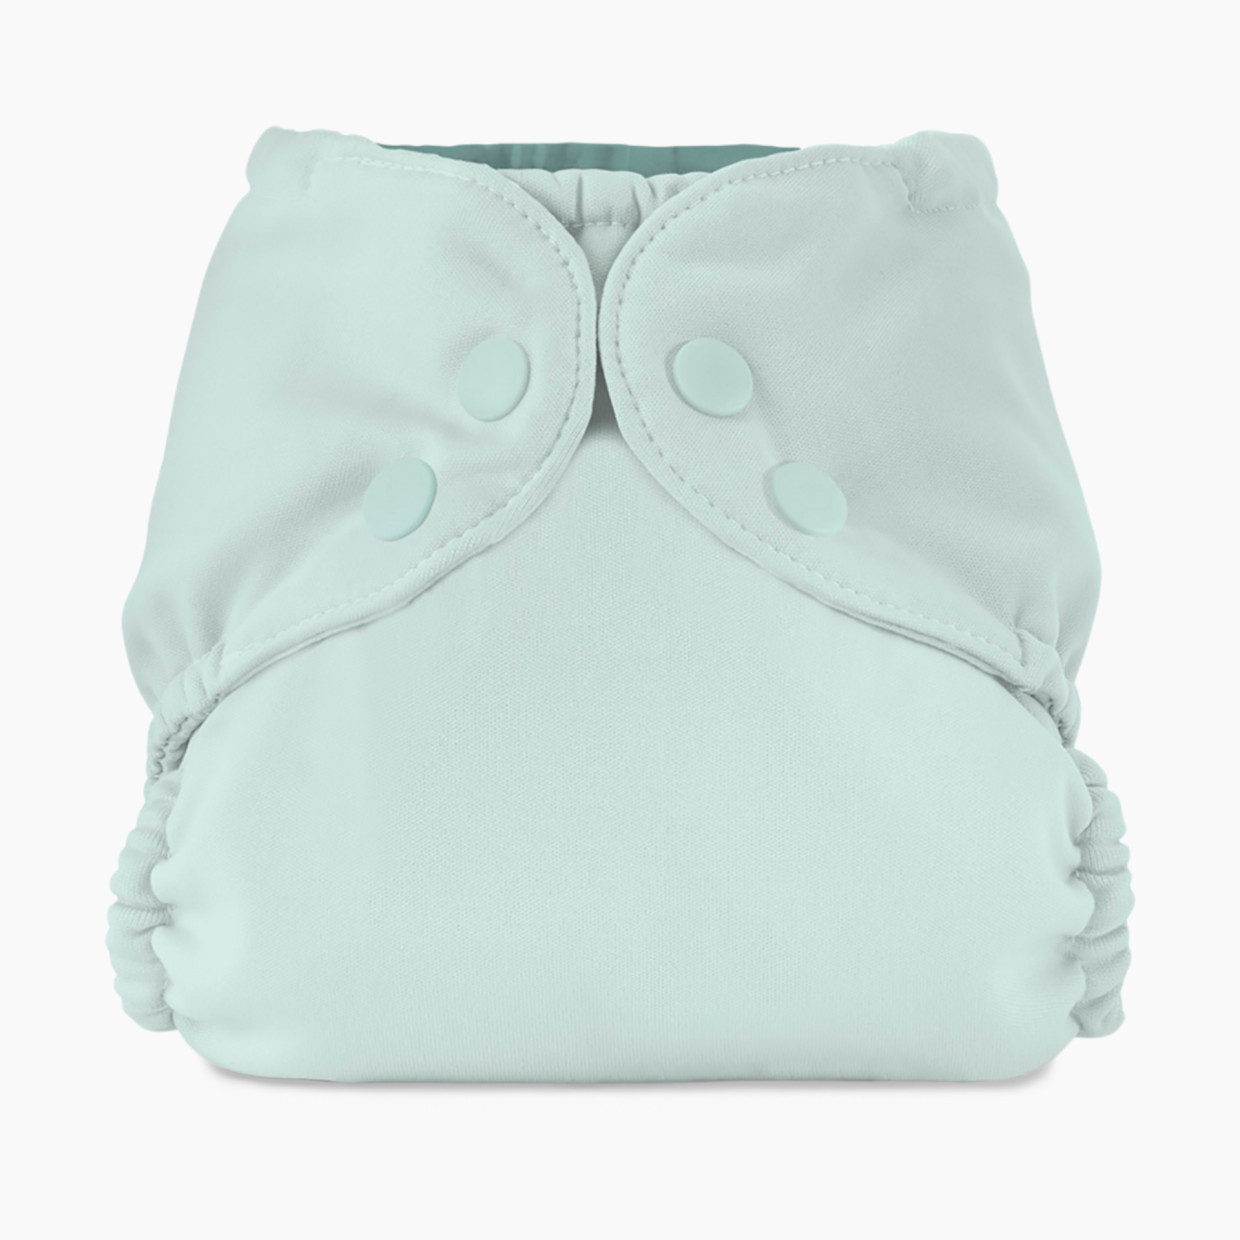 Esembly Recycled Diaper Cover (Outer) + Swim Diaper - Mist, Size 1 (7-17 Lbs).